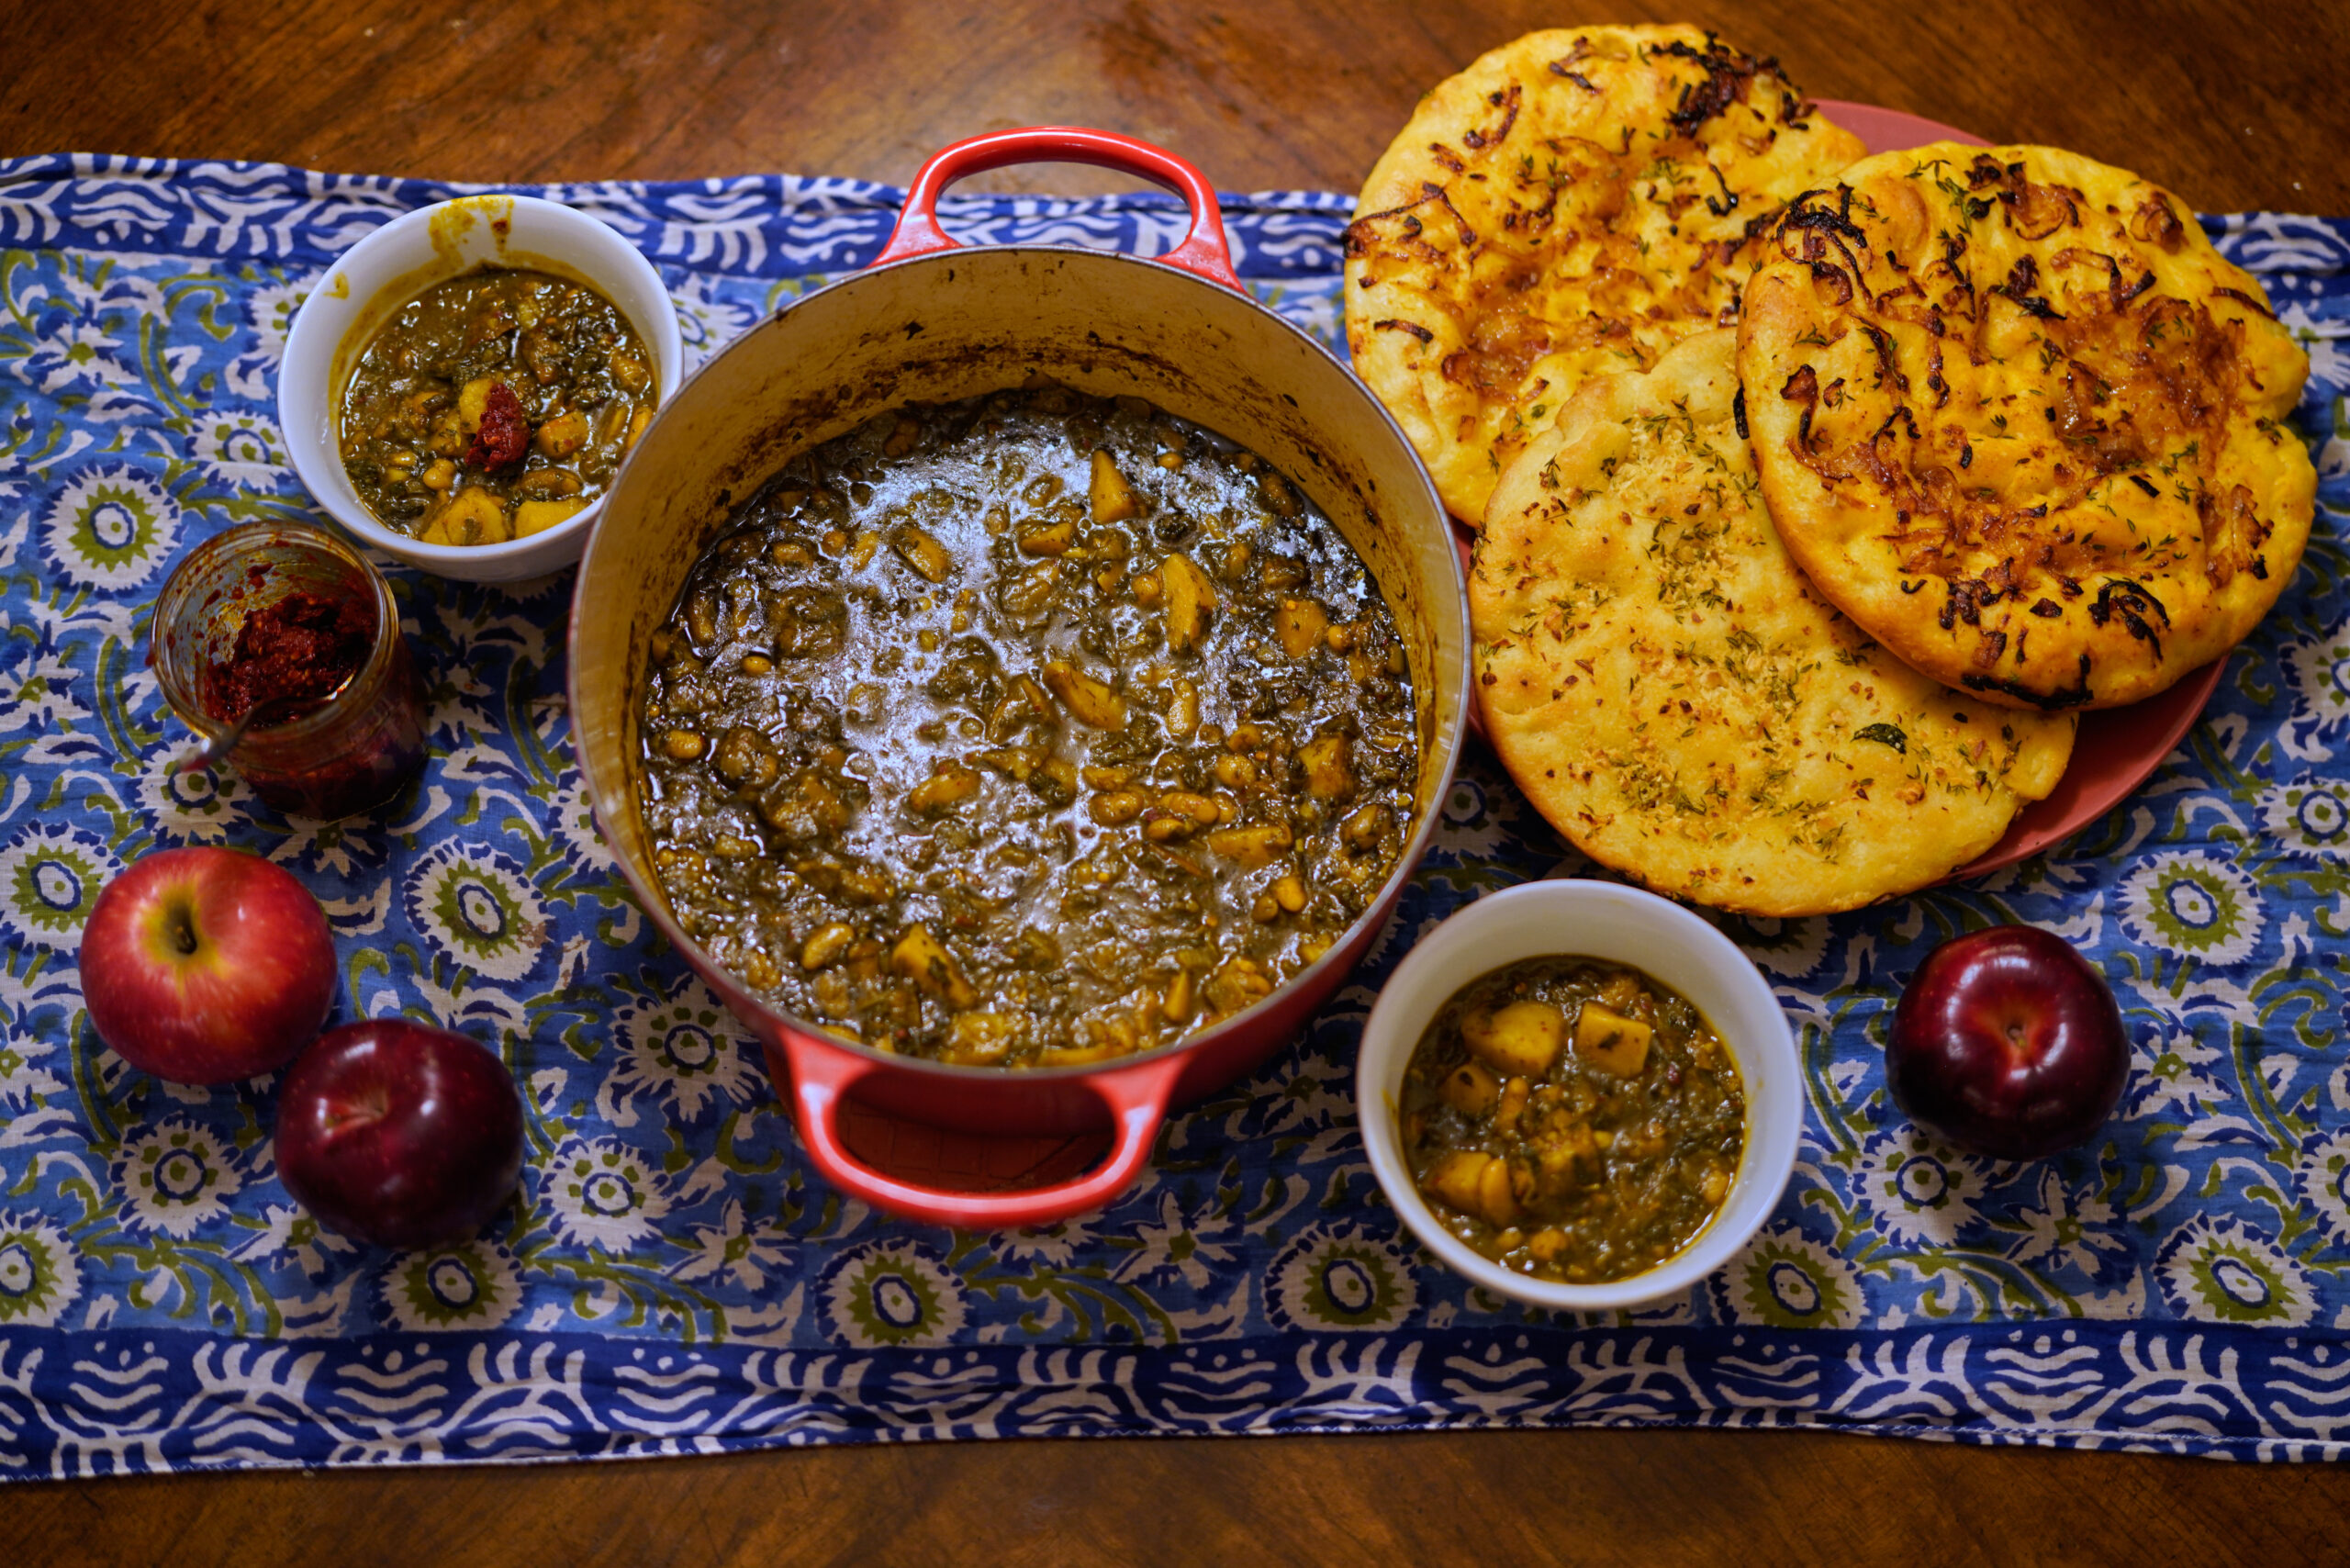 Tunisian Recipe for Spinach & Hope in the New Year